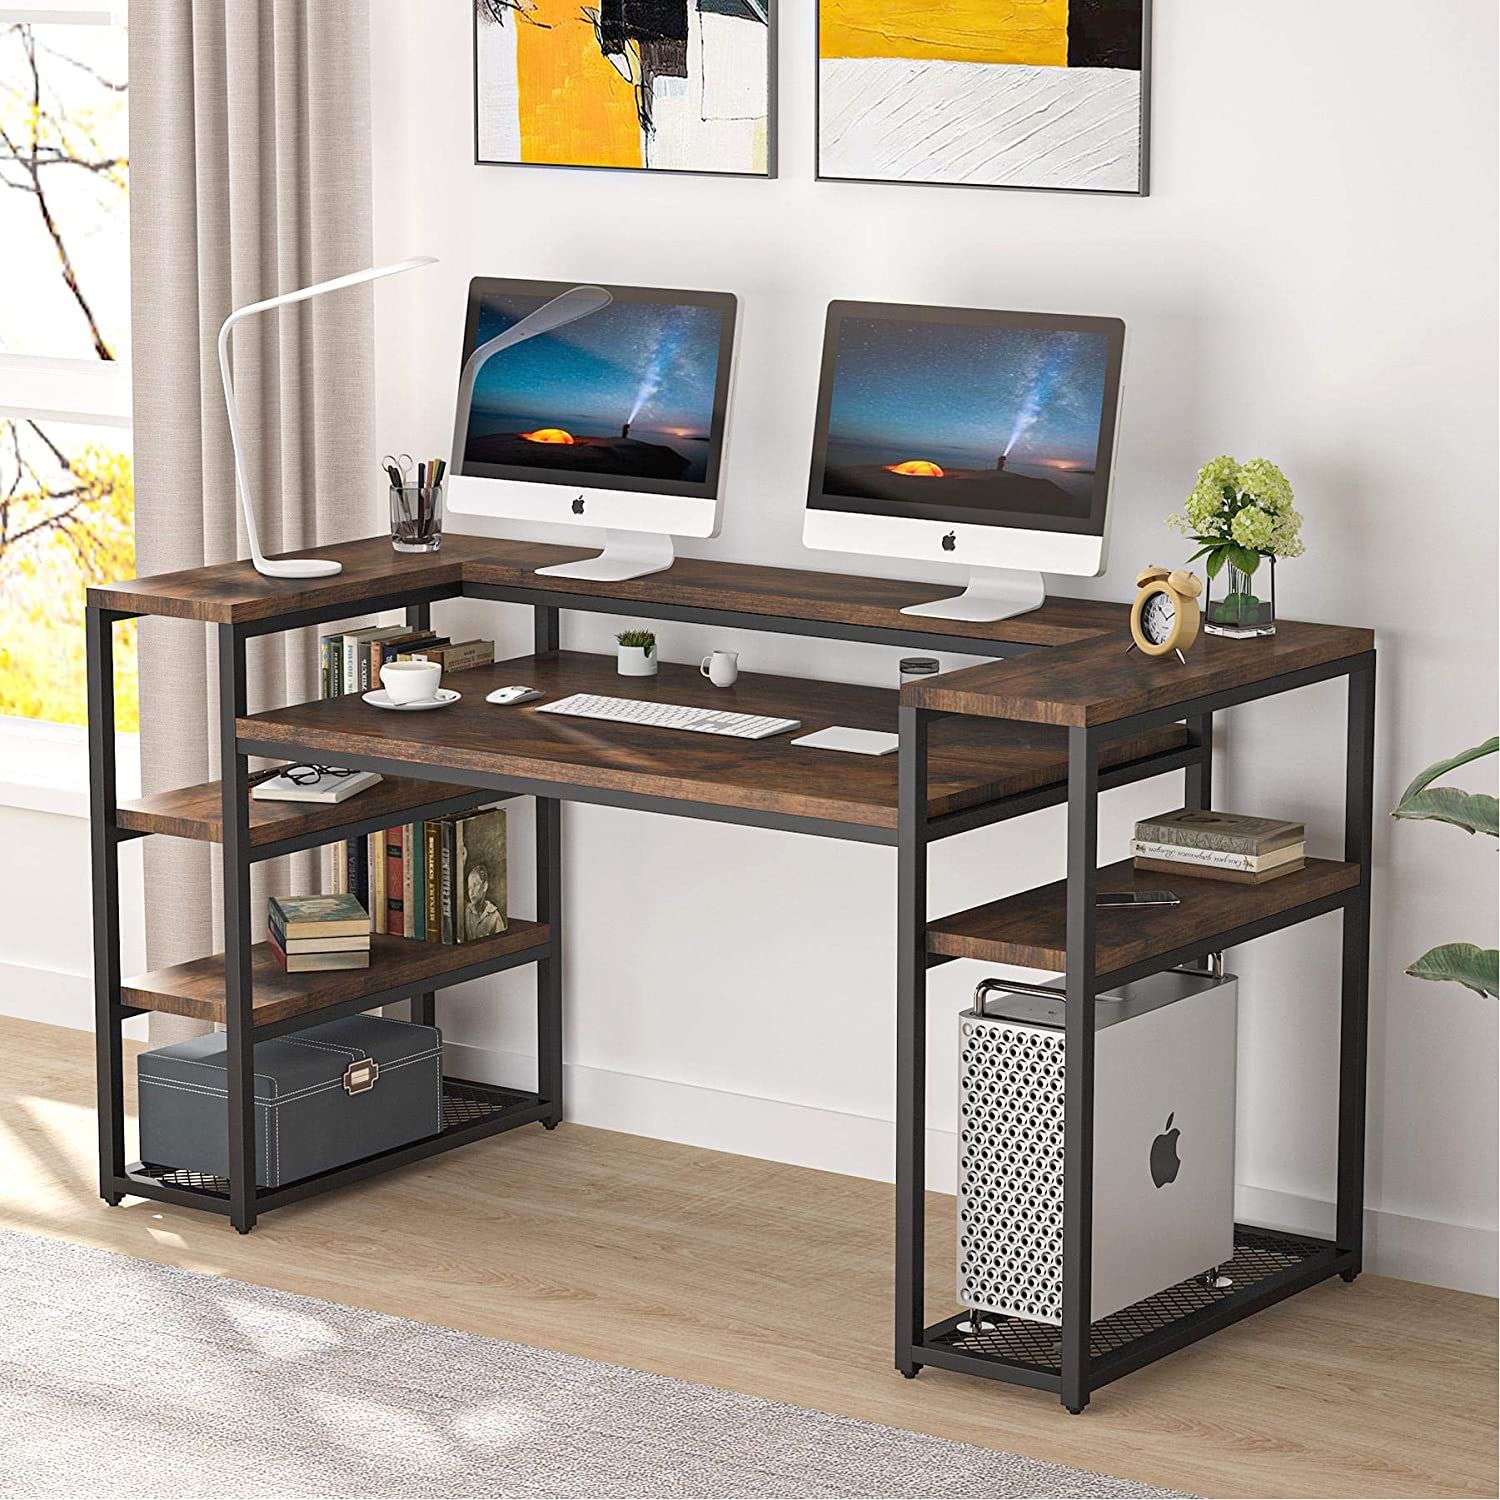 Tribesigns 63 Inch Computer Desk With Open Storage Shelves, Large Inside Executive Desks With Dual Storage (View 1 of 15)